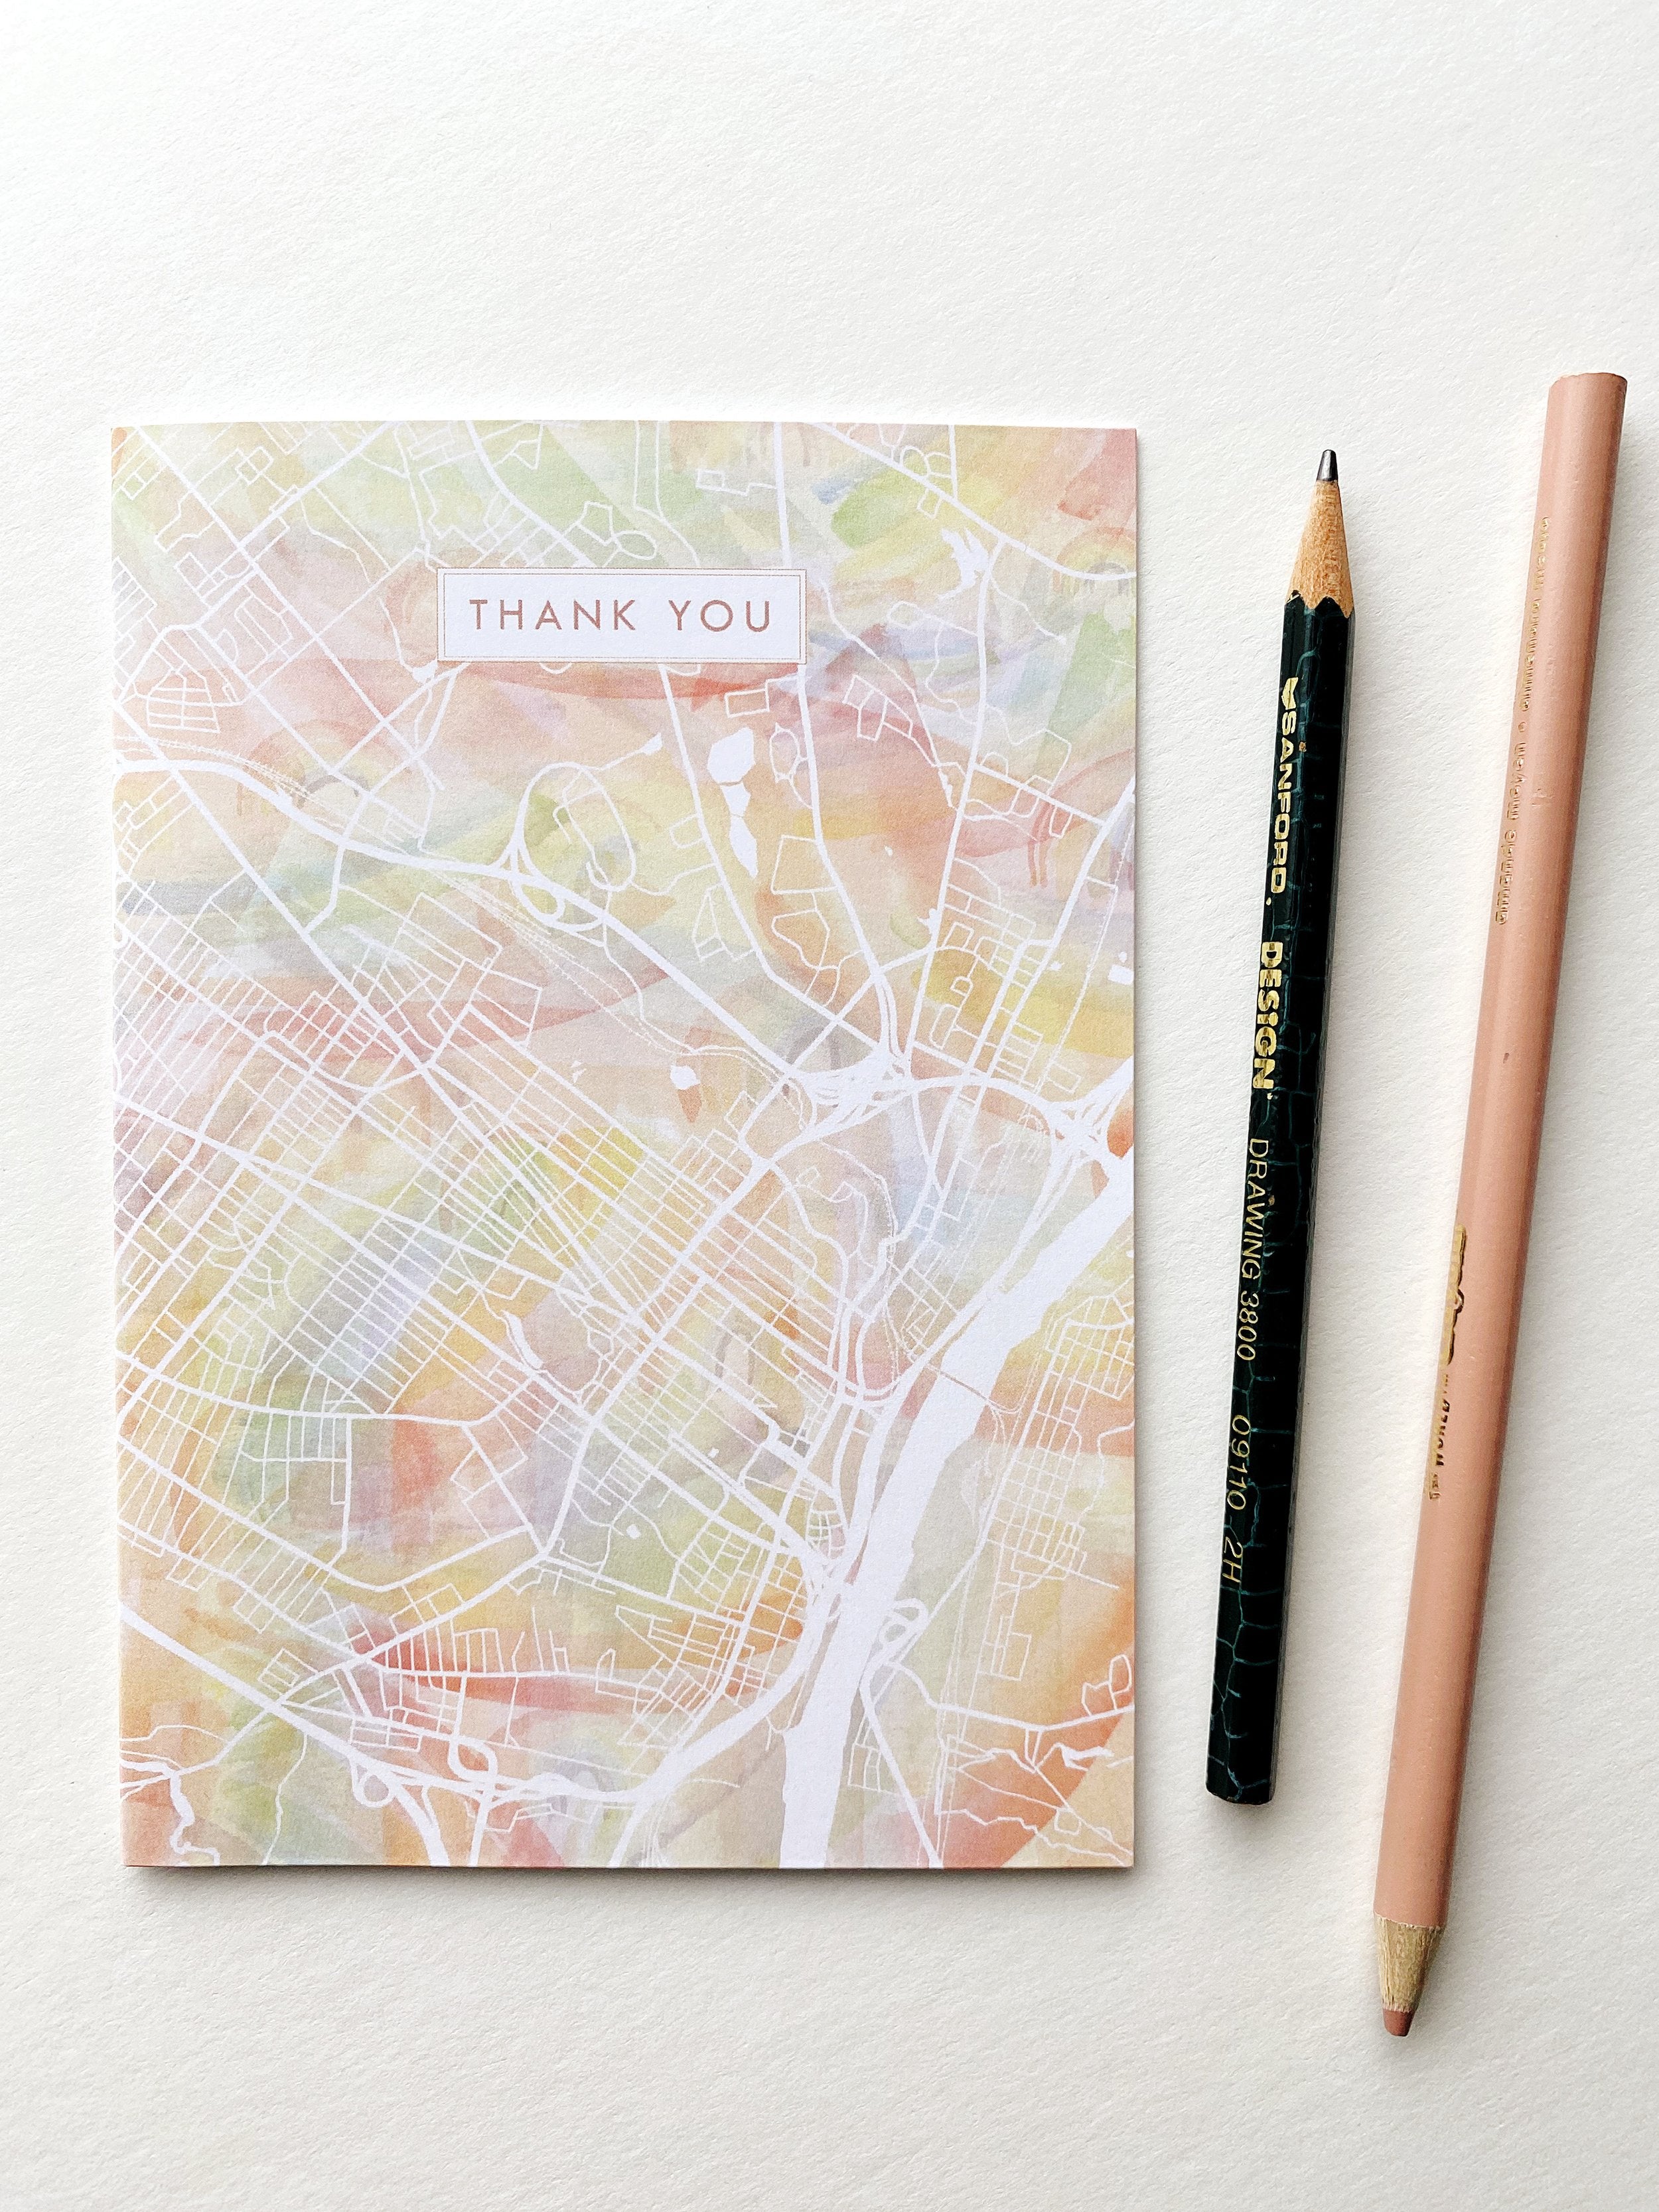 ALBANY New York Rainbow Watercolor Wash Map - thank you card